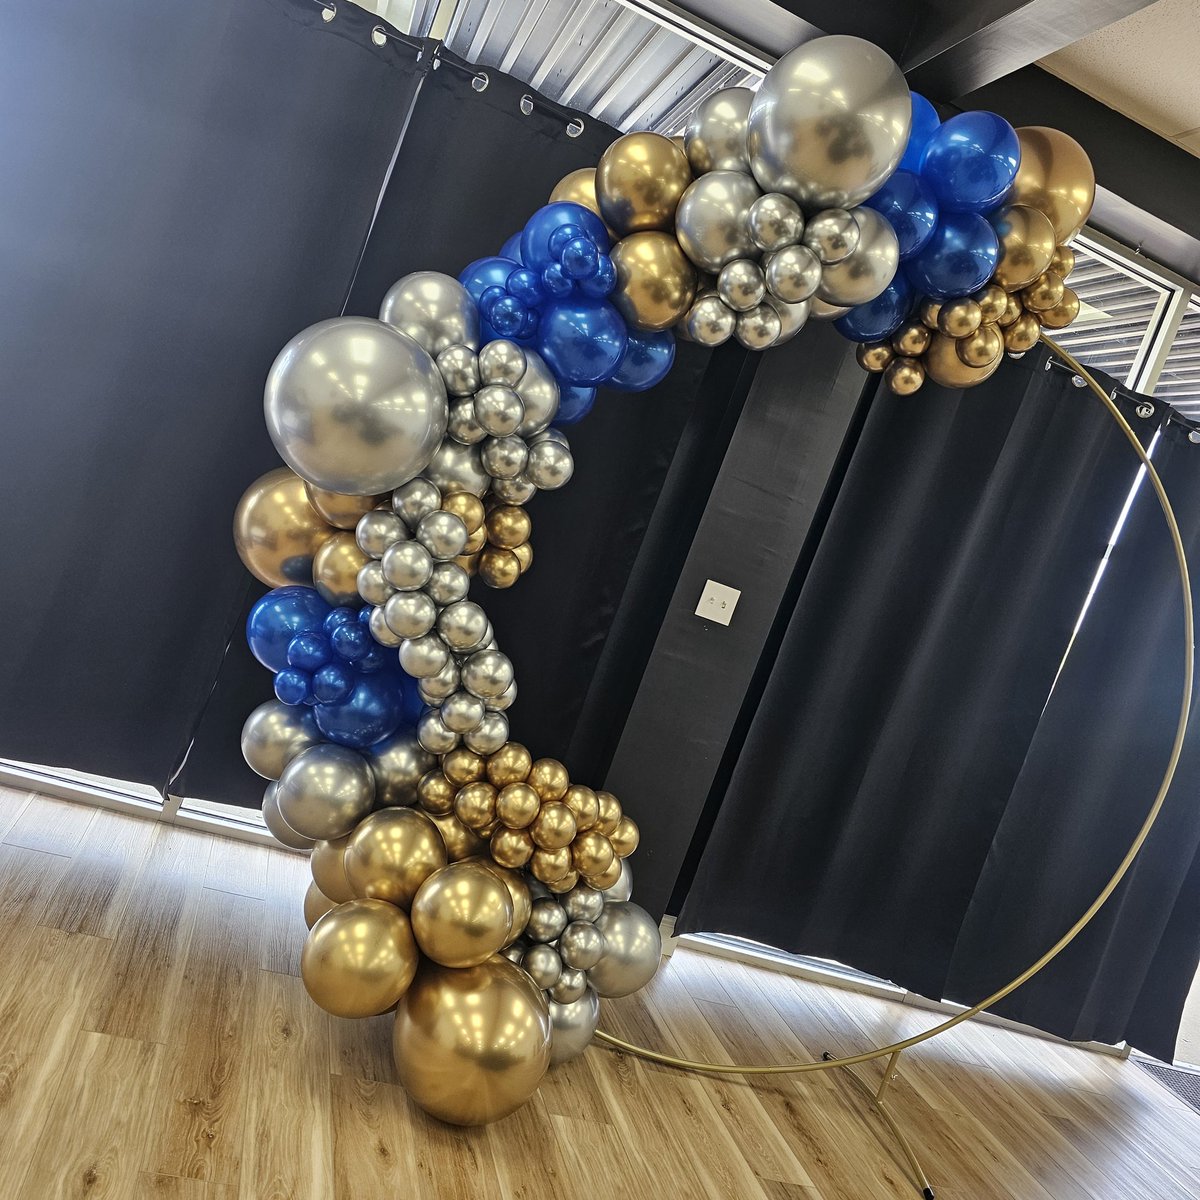 Wishing a #happybirthday to our client!  We loved the color scheme! What is your fav color combination?  Comment below⏬️
.
.
.
#balloons #balloondecor #balloongarland #ballooncolumns #nola #nolapartystore  #nolaparty #nolapartysupplies